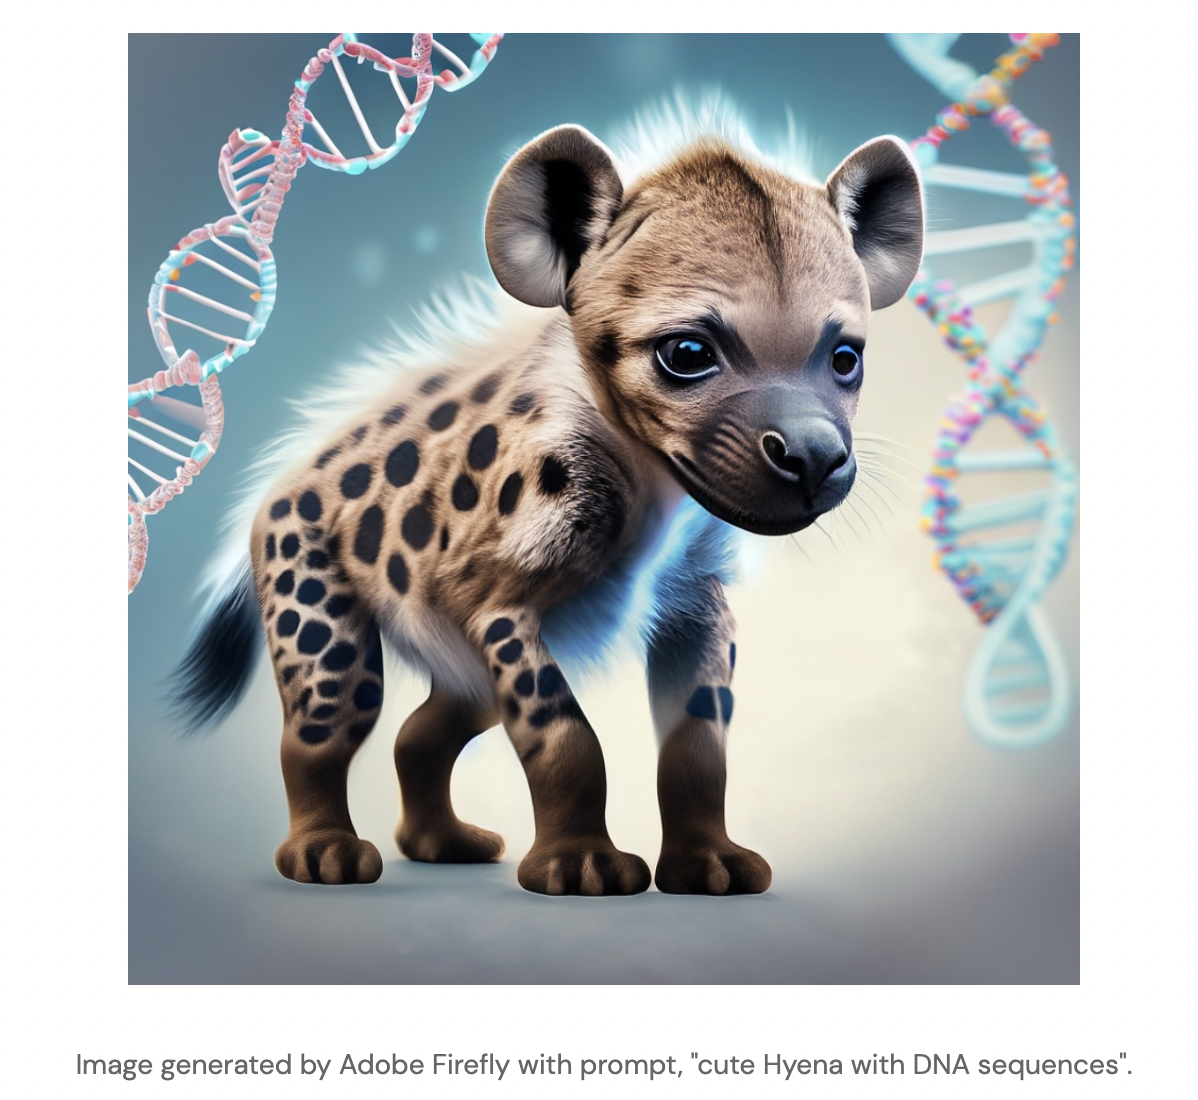 Stanford researchers present HyenaDNA: A long-range genomic basis model with context lengths up to 1 million tokens at single nucleotide resolution